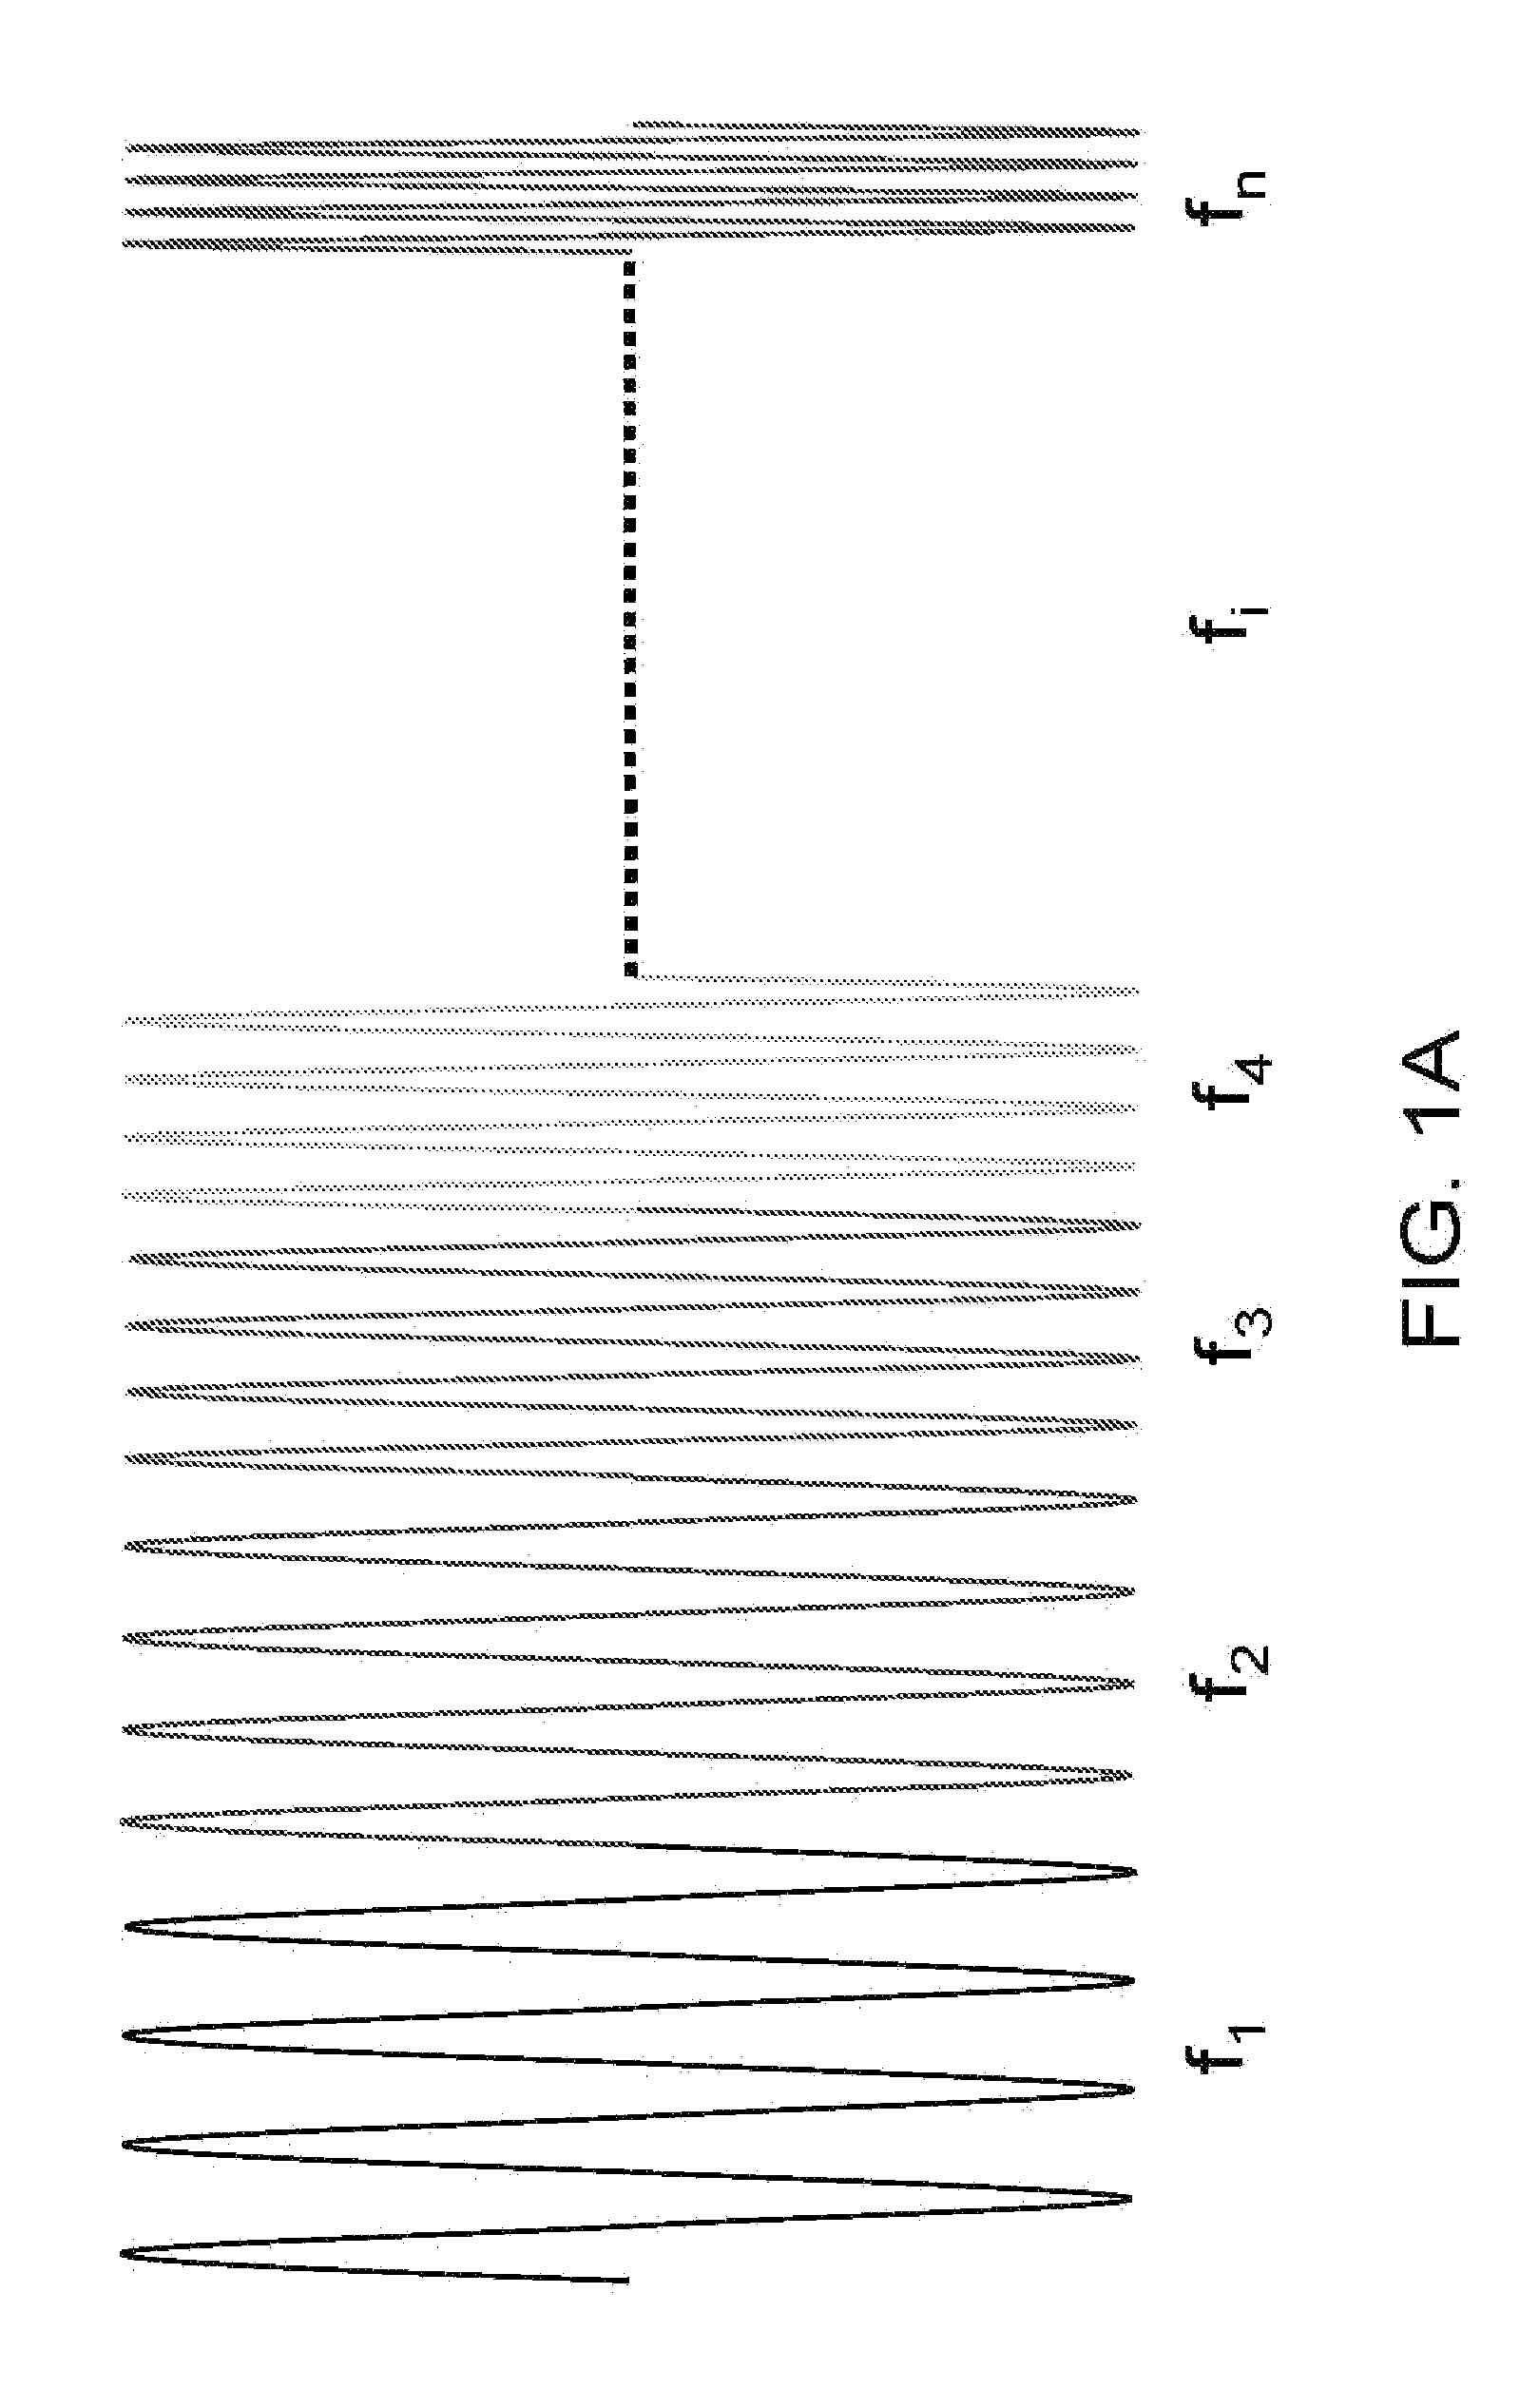 Multi-path mitigation in rangefinding and tracking objects using reduced attenuation RF technology